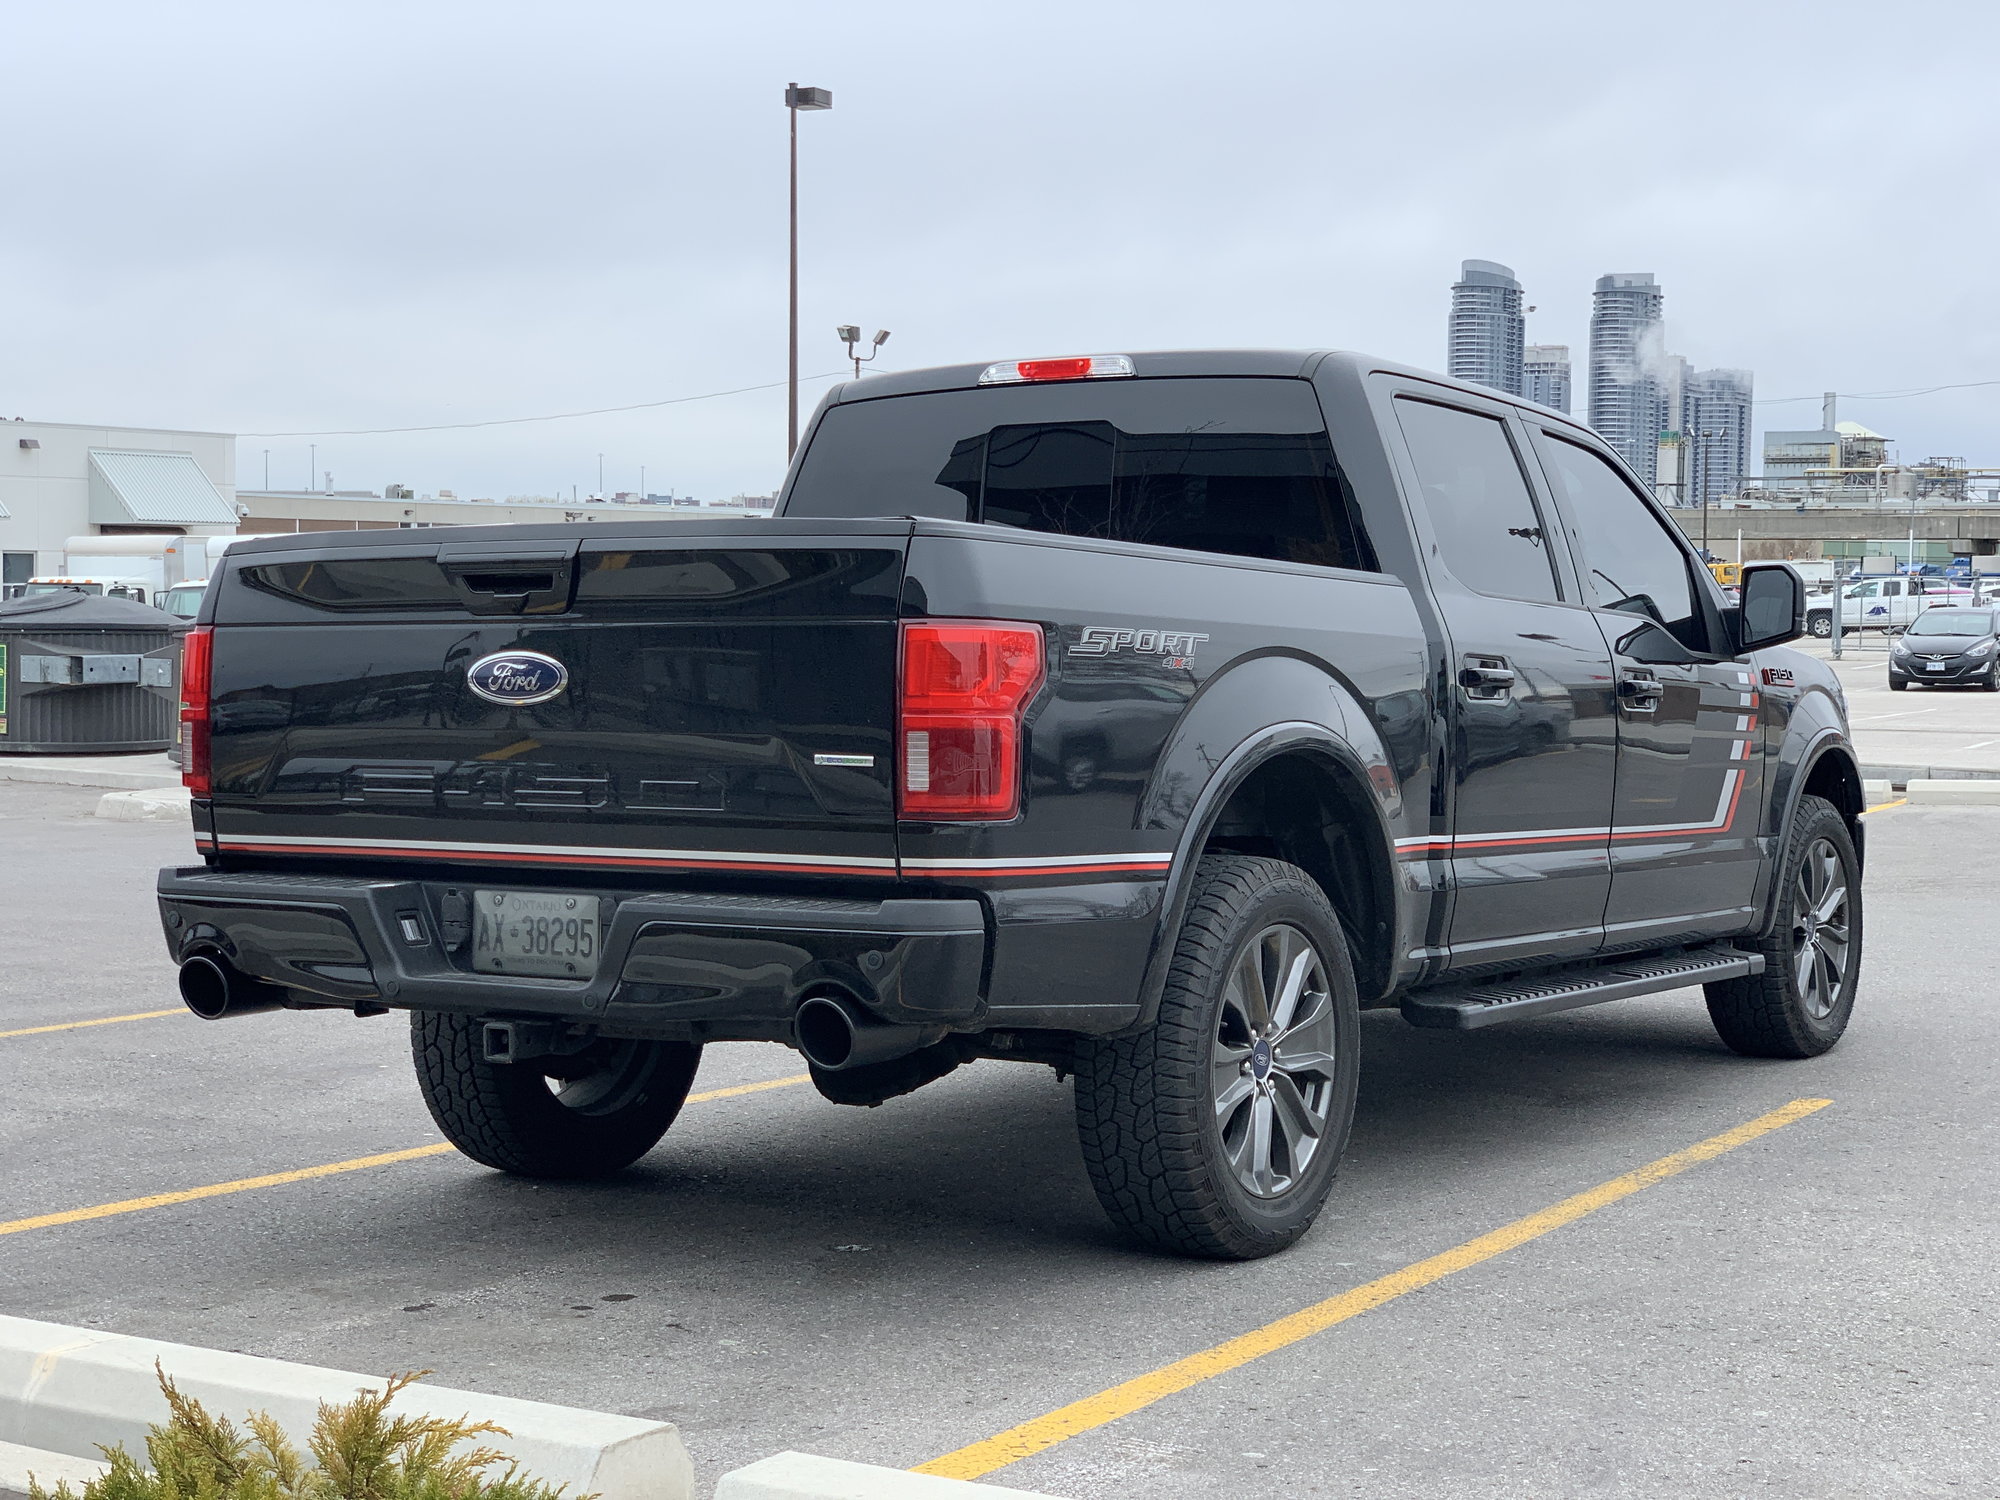 2020 F150 Dual Exhaust : Awe Exhaust Suite For The 15 Ford F 150 V8 Awe